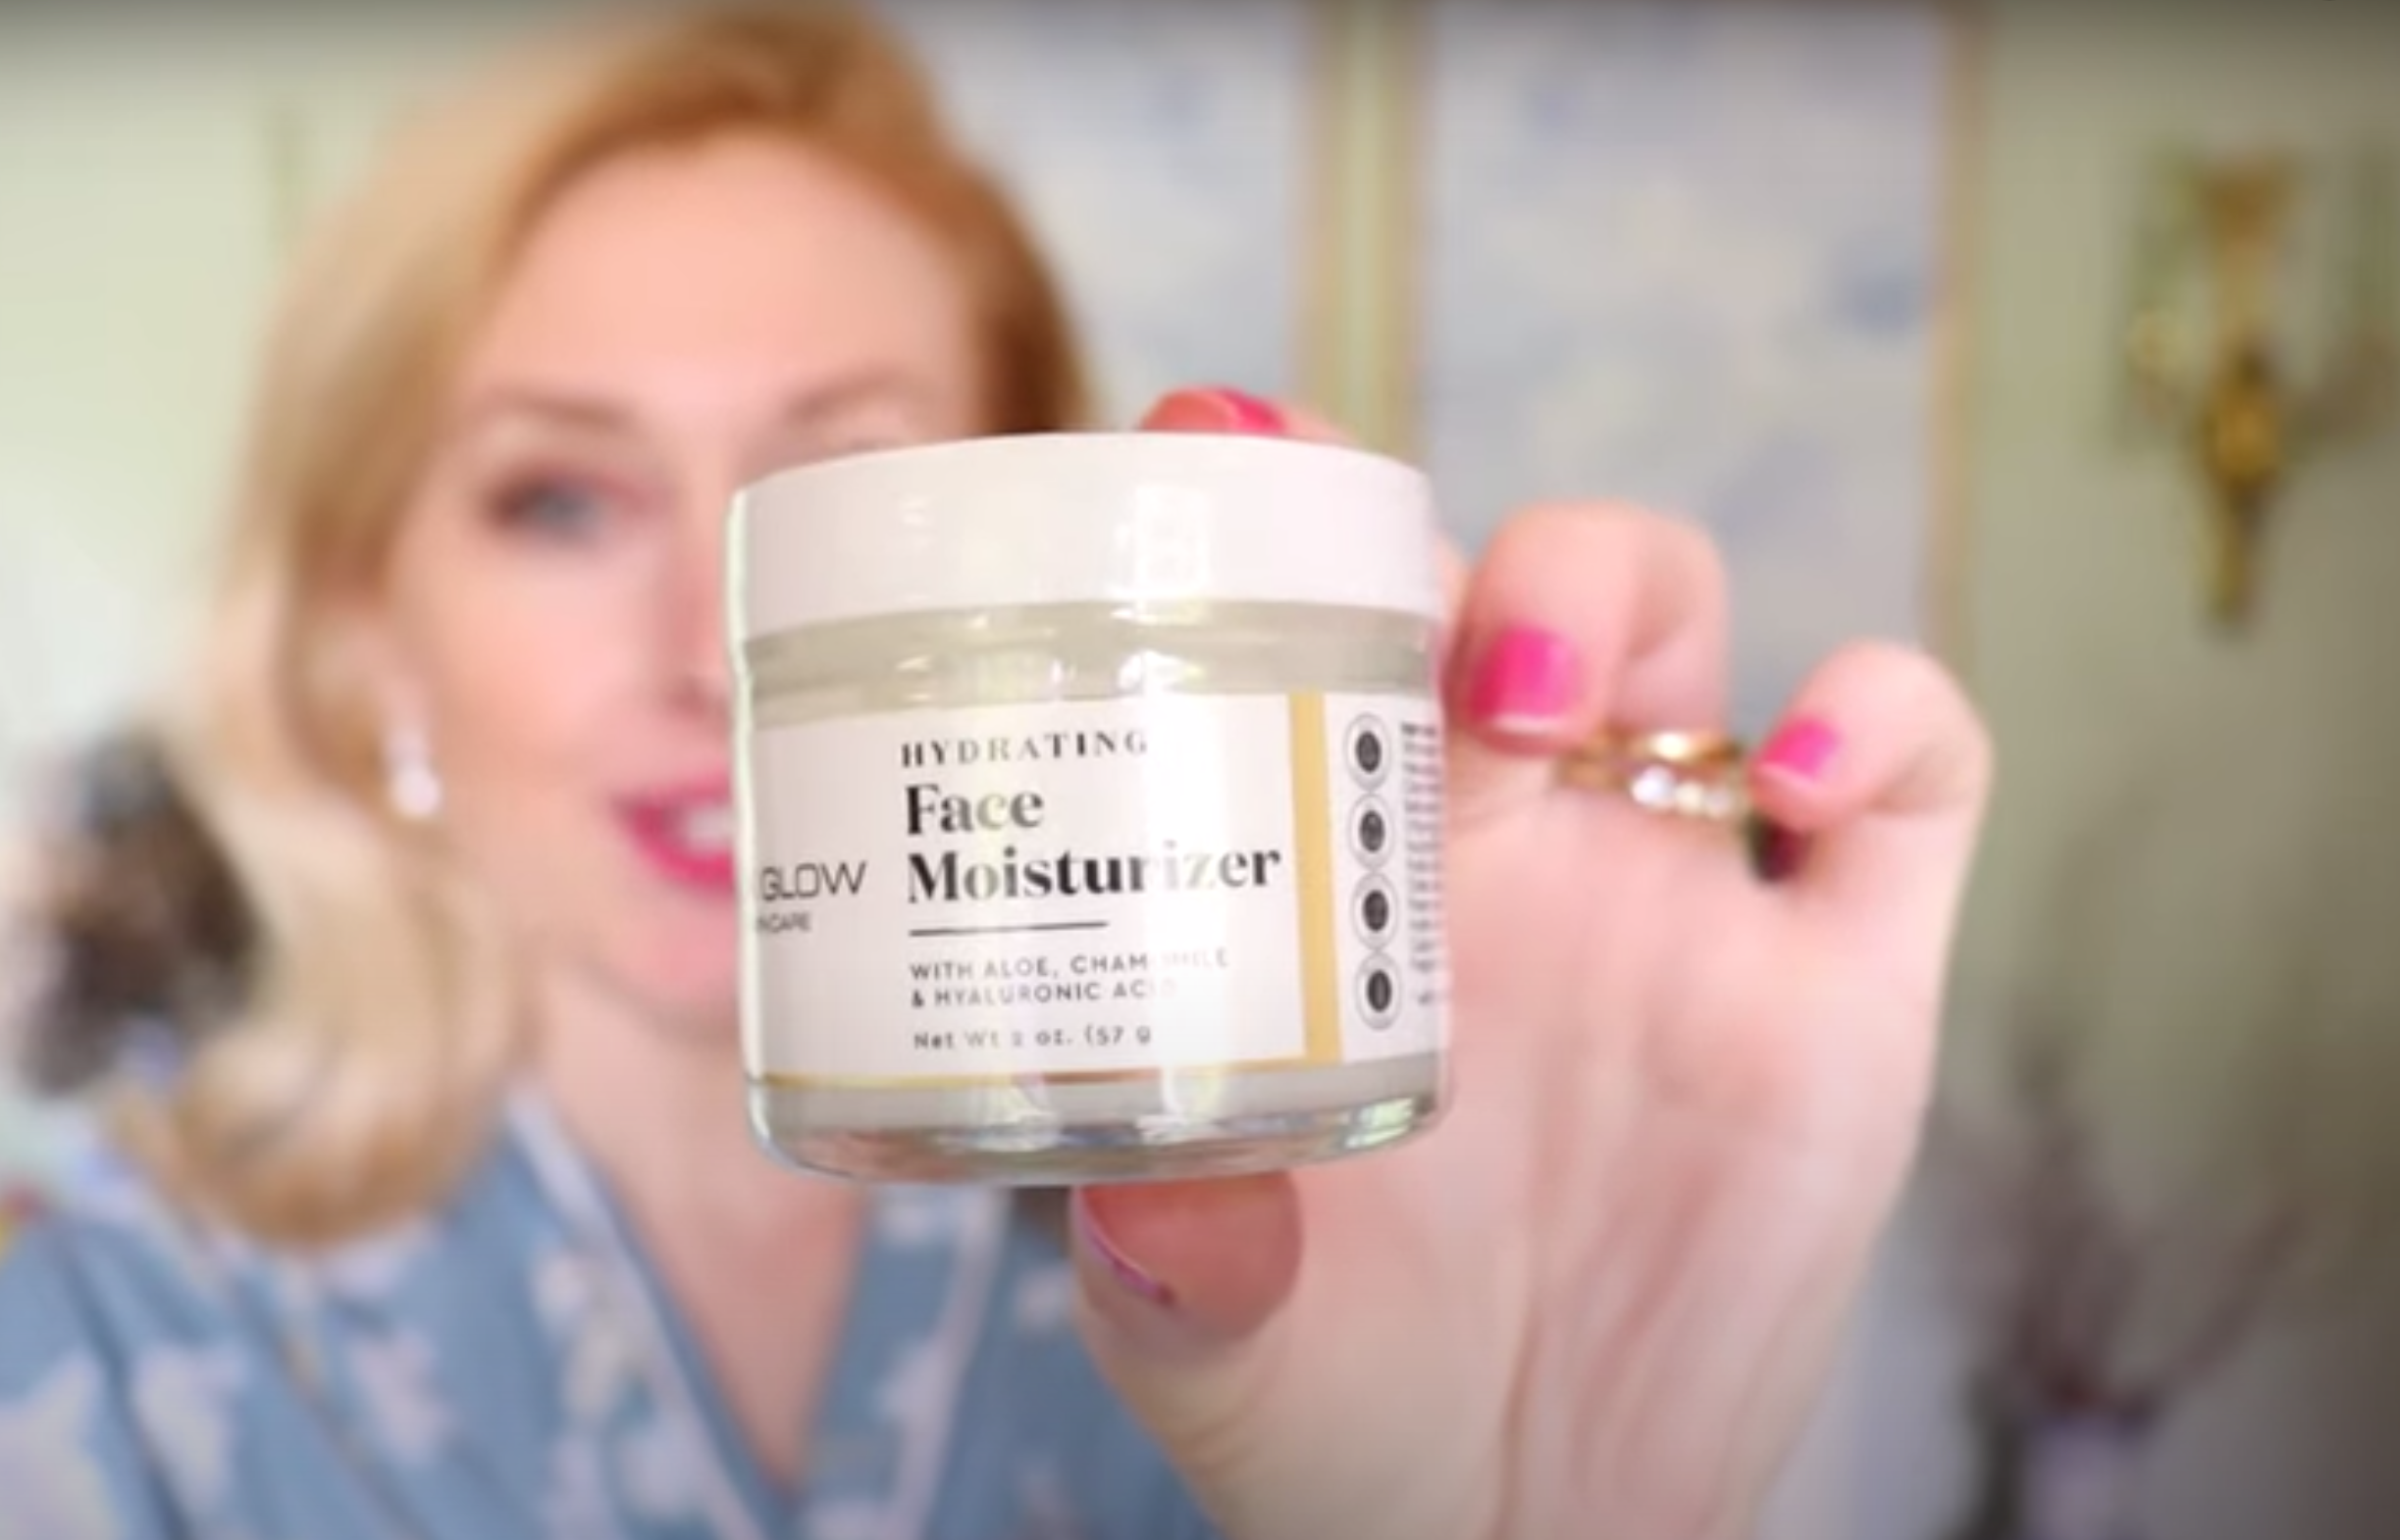 Lux Glow Skin Care Expert Heather Graham (@ohsolovingly) Shares Her Top Tips for Skin Care and Skin Routine Cheat Codes